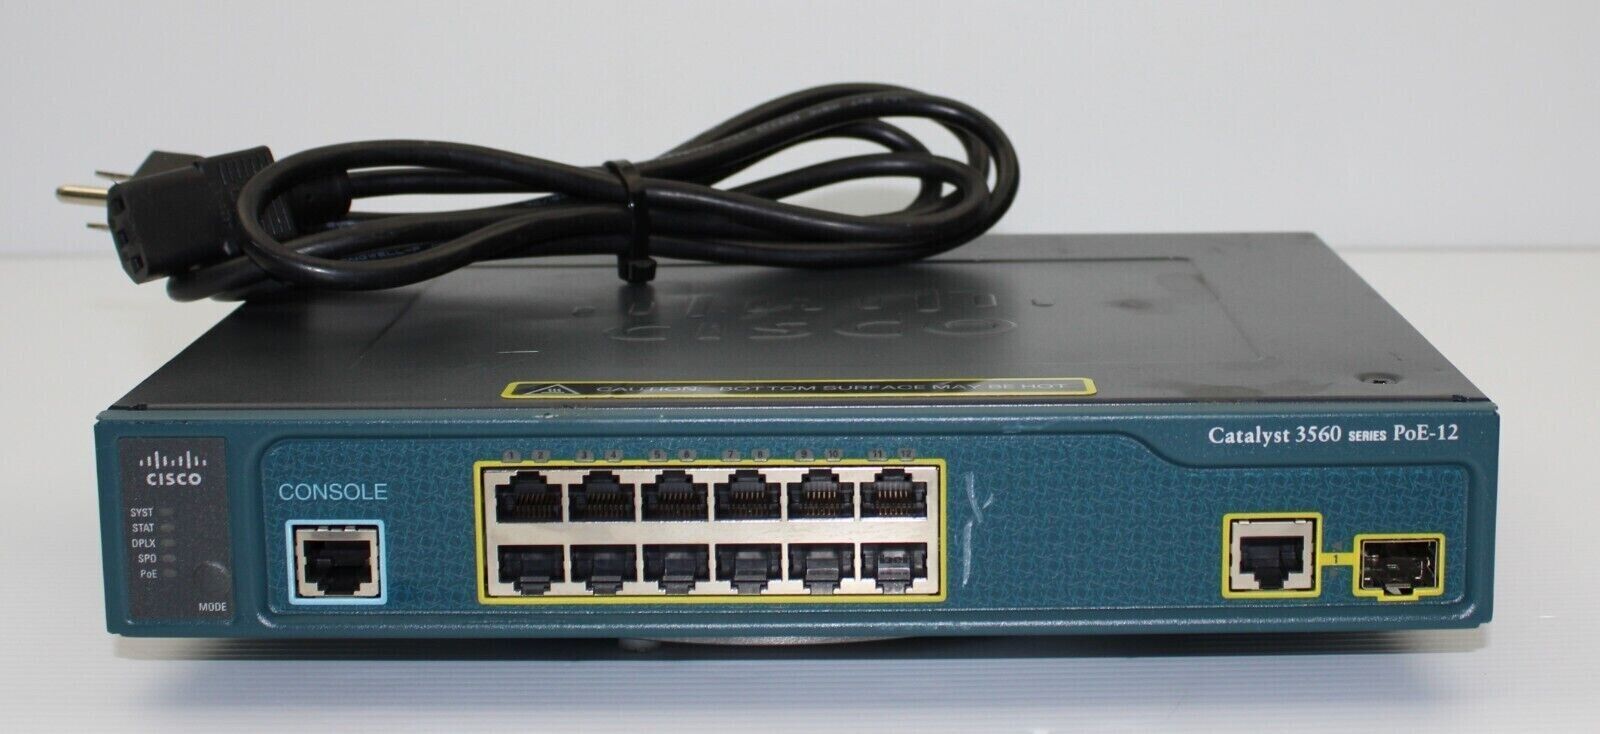 CISCO Catalyst 3560-12PC-S  Ethernet Switch with PoE WS-C3560-12PC-S